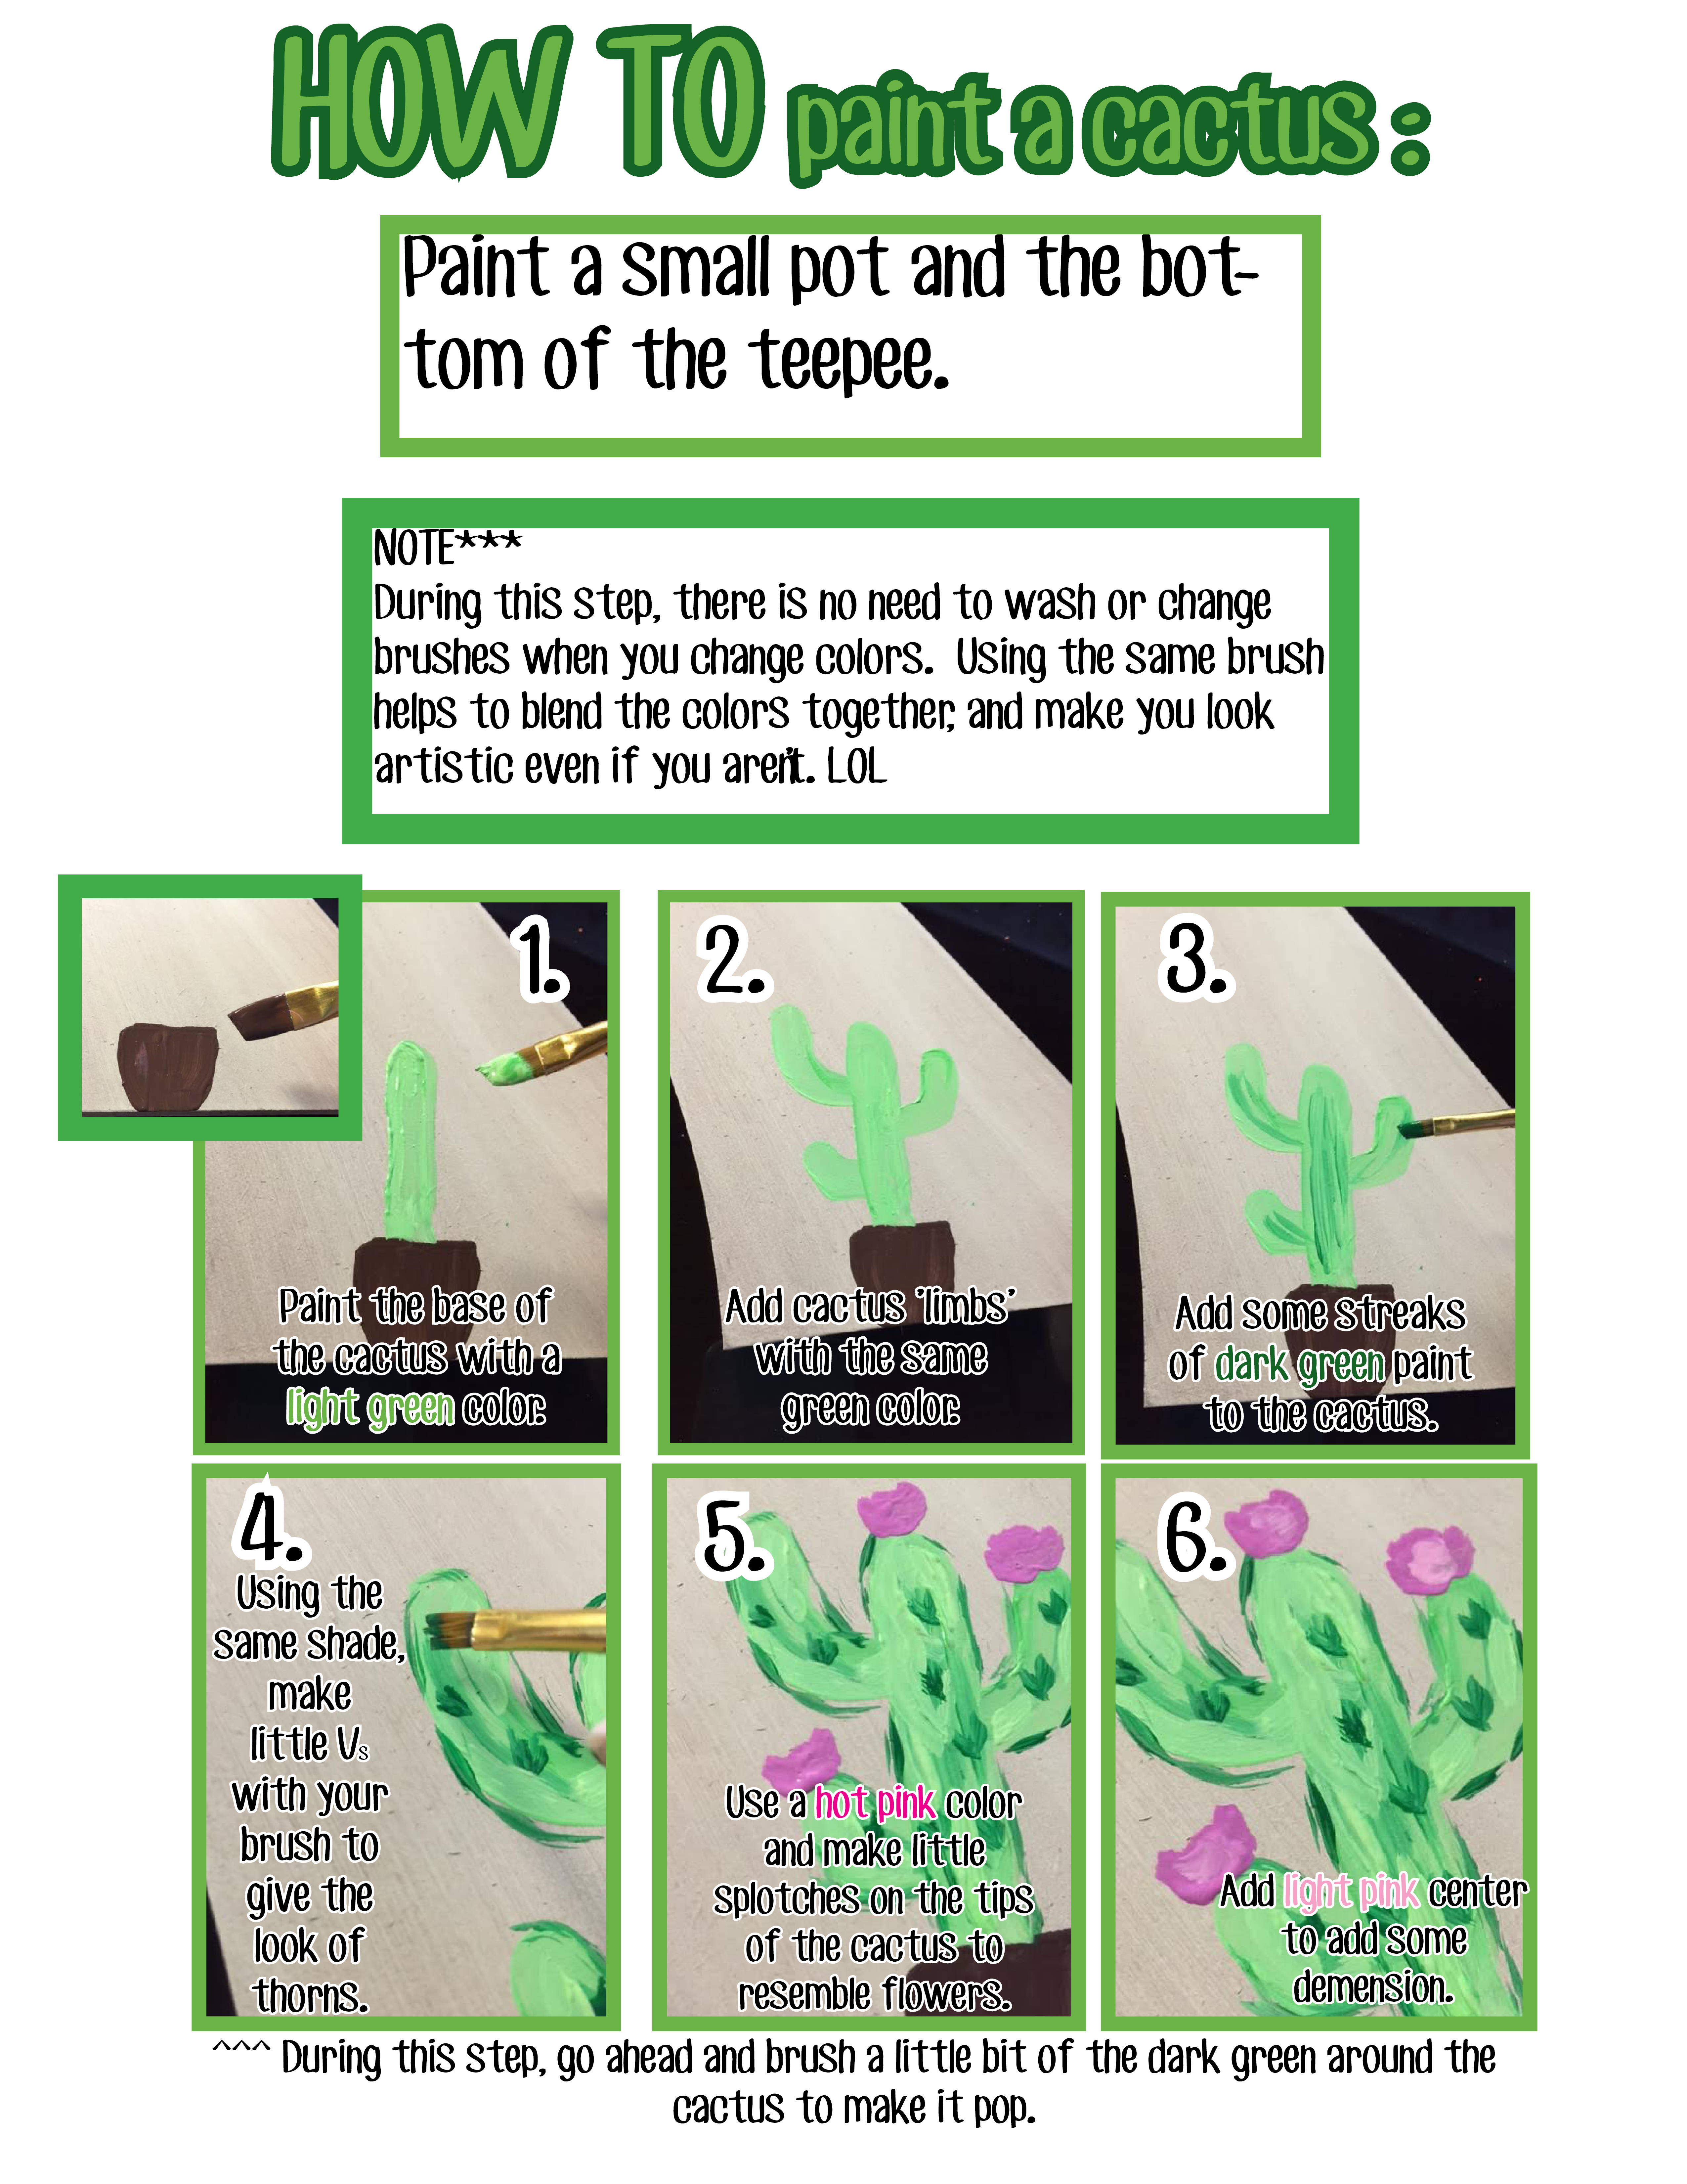 How to paint a cactus